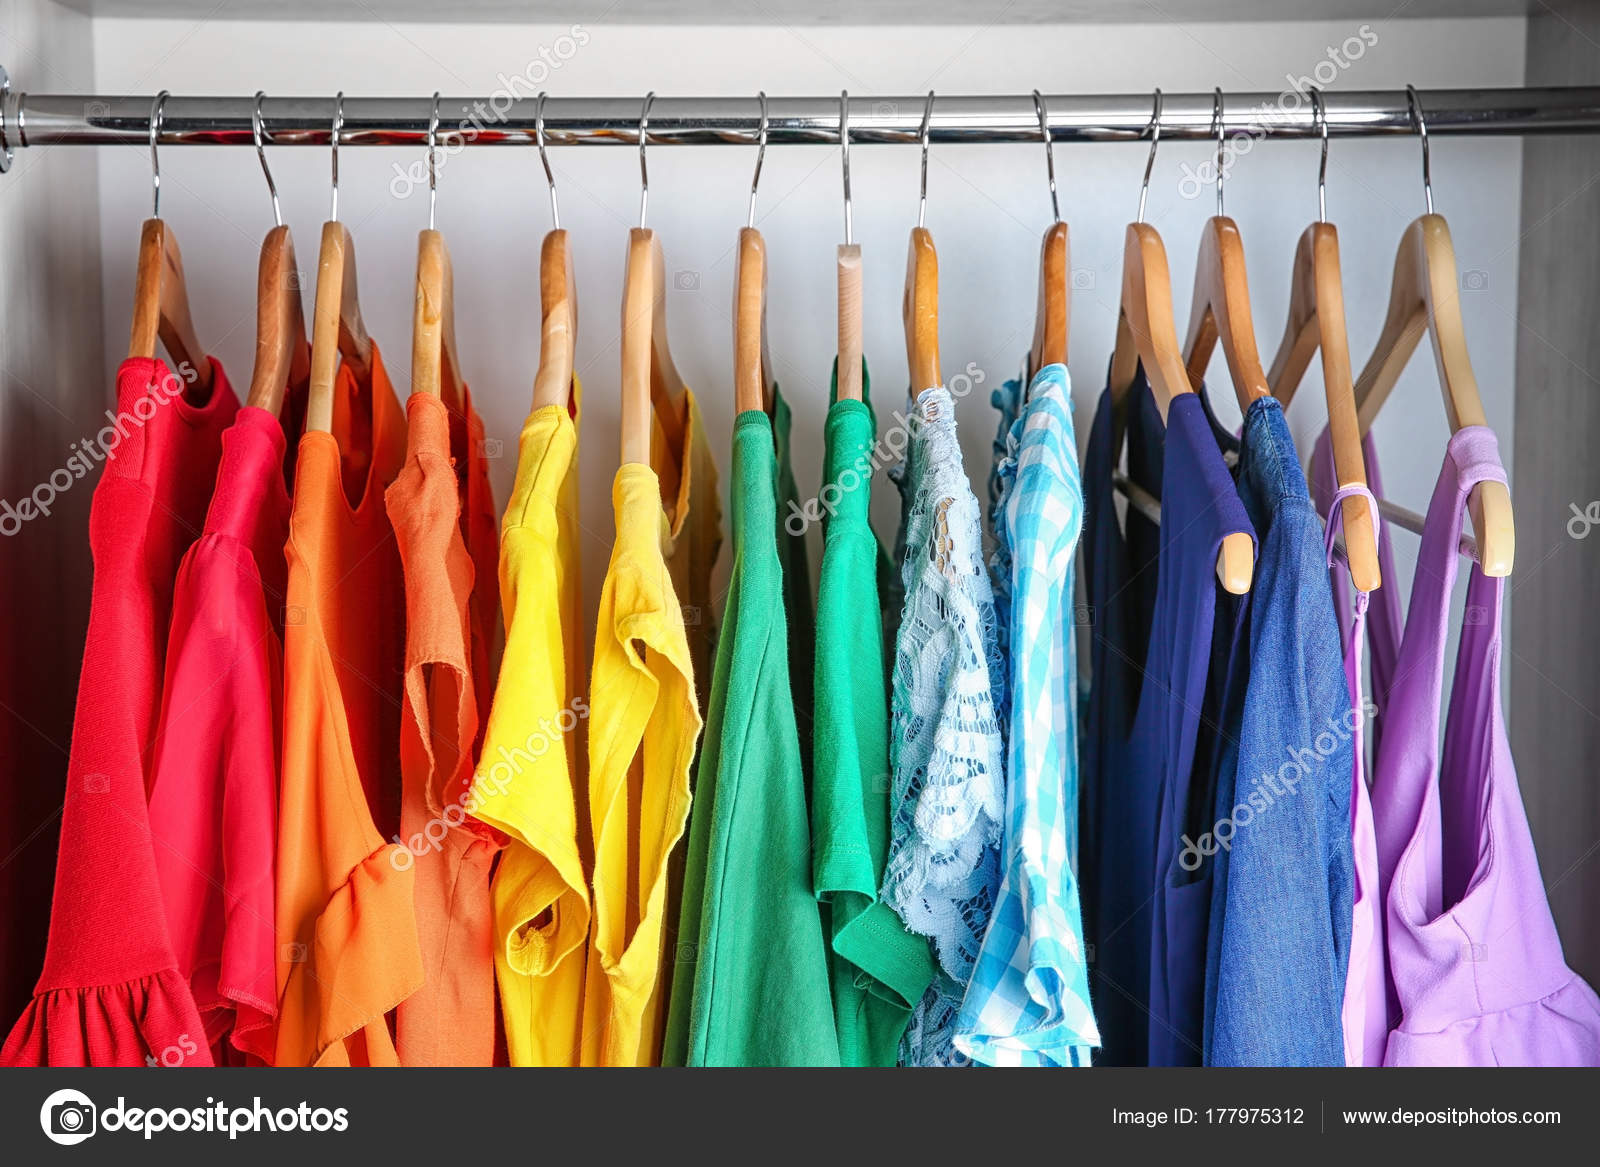 https://st3.depositphotos.com/1177973/17797/i/1600/depositphotos_177975312-stock-photo-colorful-clothes-on-hangers-in.jpg